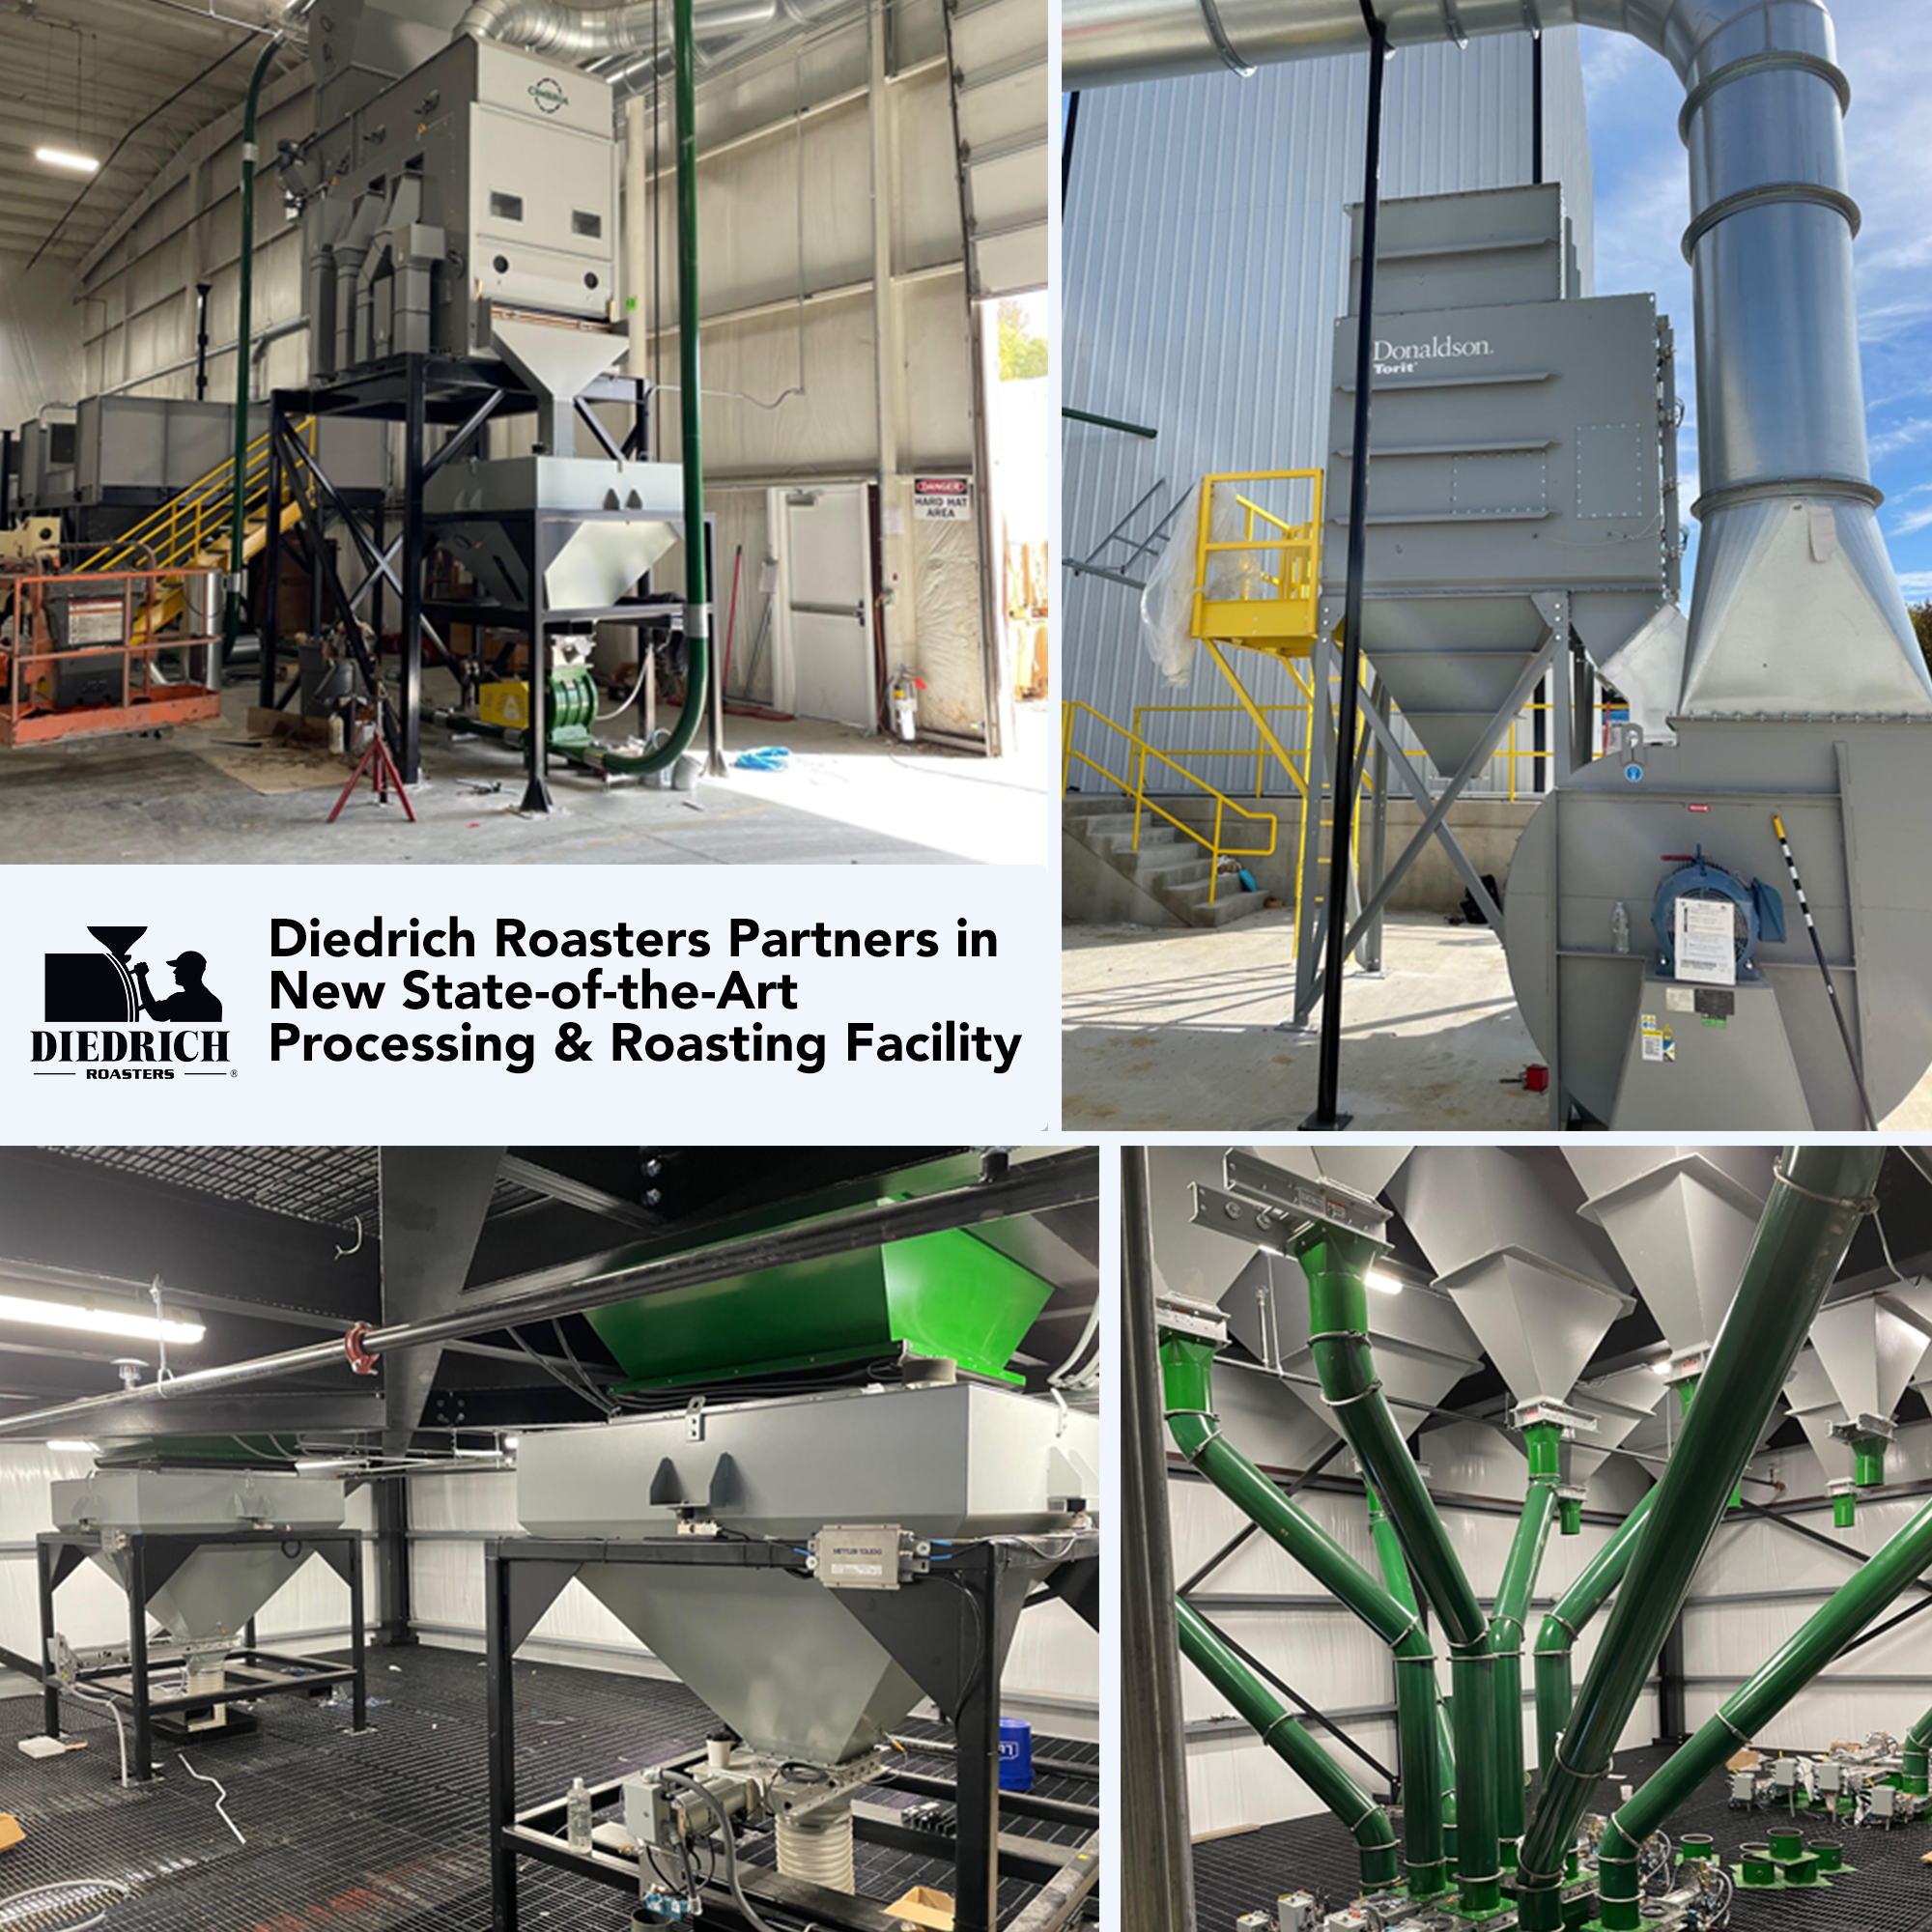 Diedrich Roasters Partners in New State-of-the-Art Processing & Roasting Facility